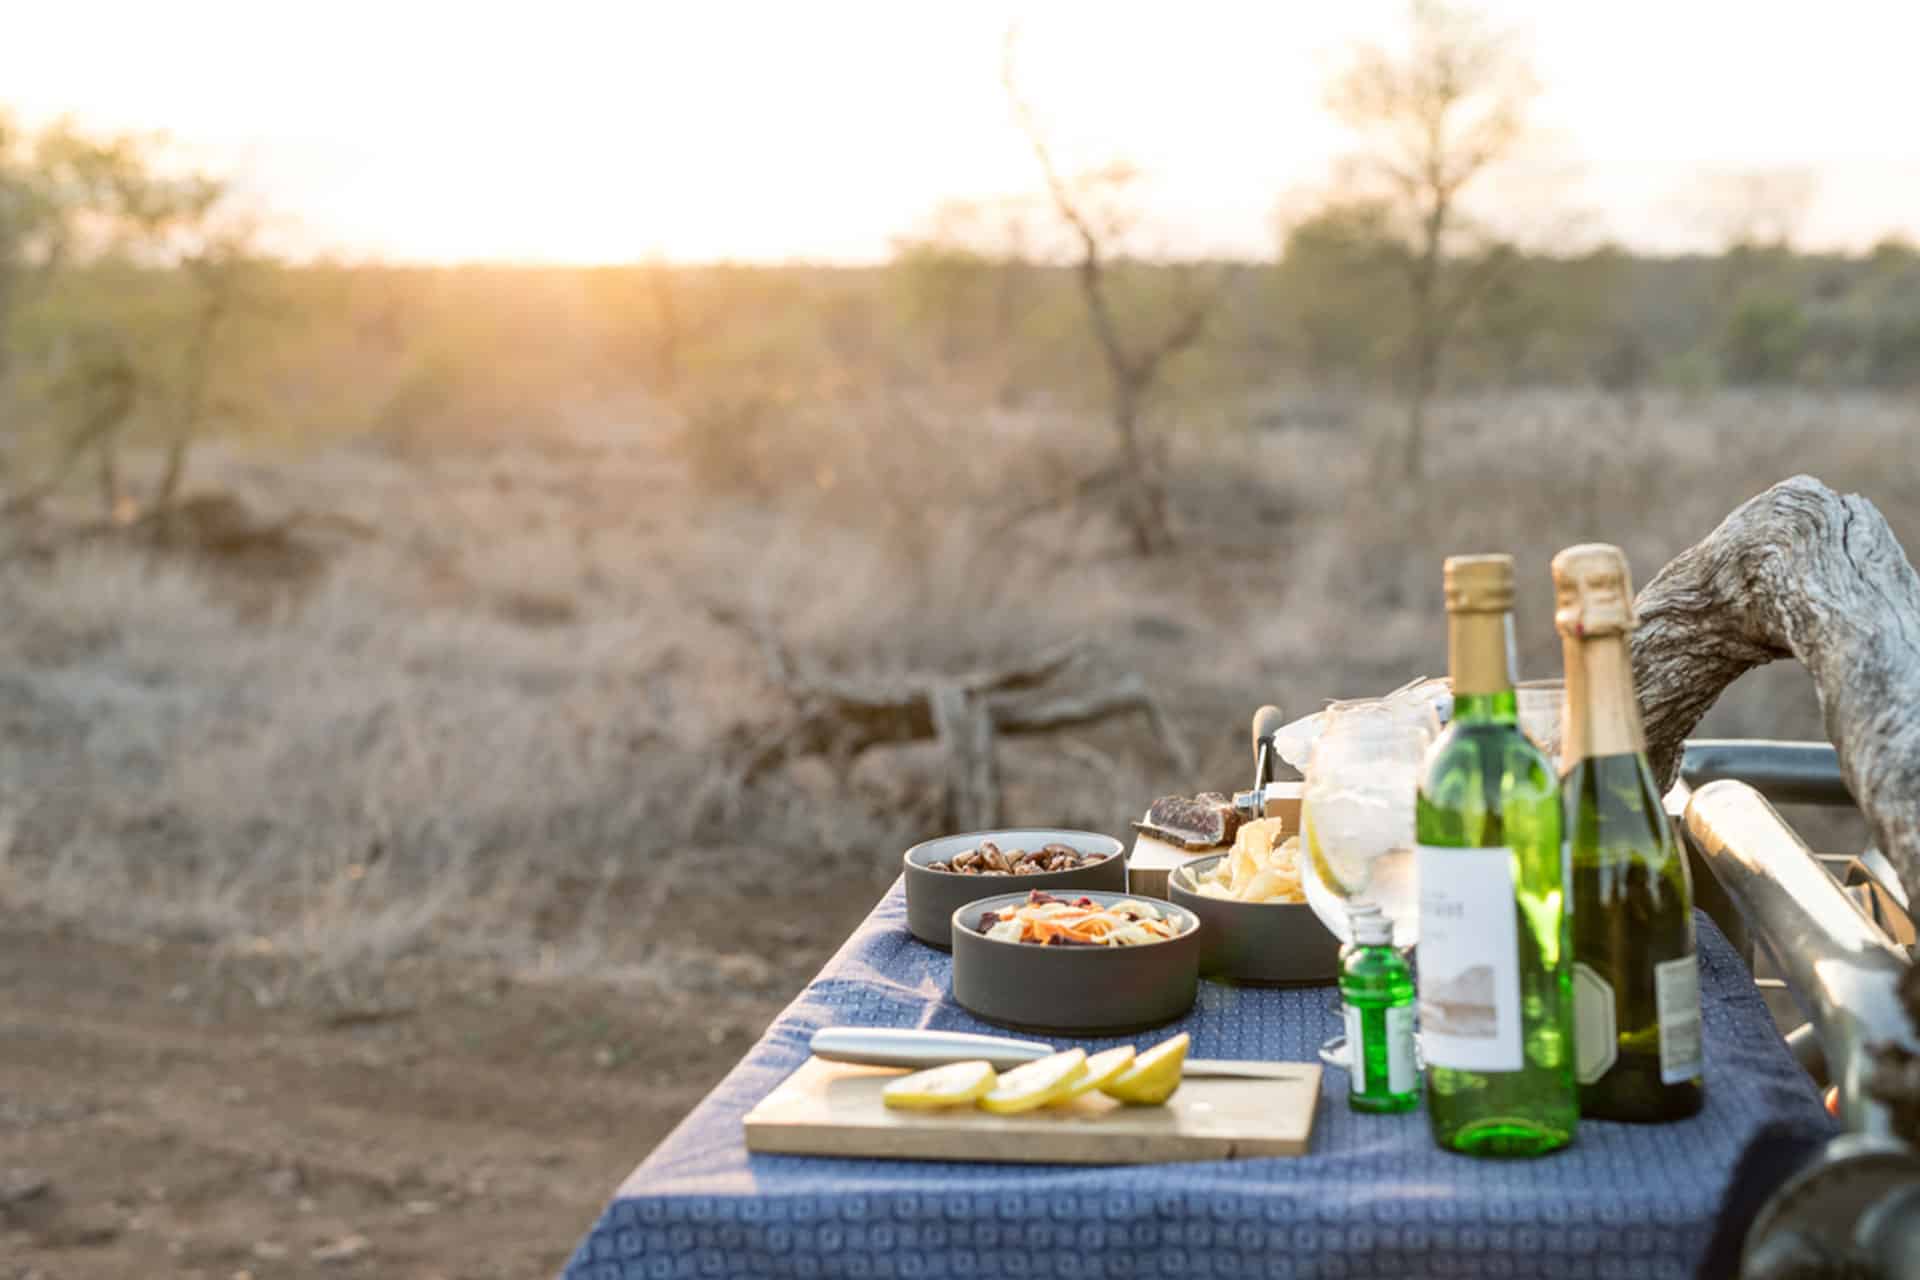 Sundowners and snacks on a safari in Africa.